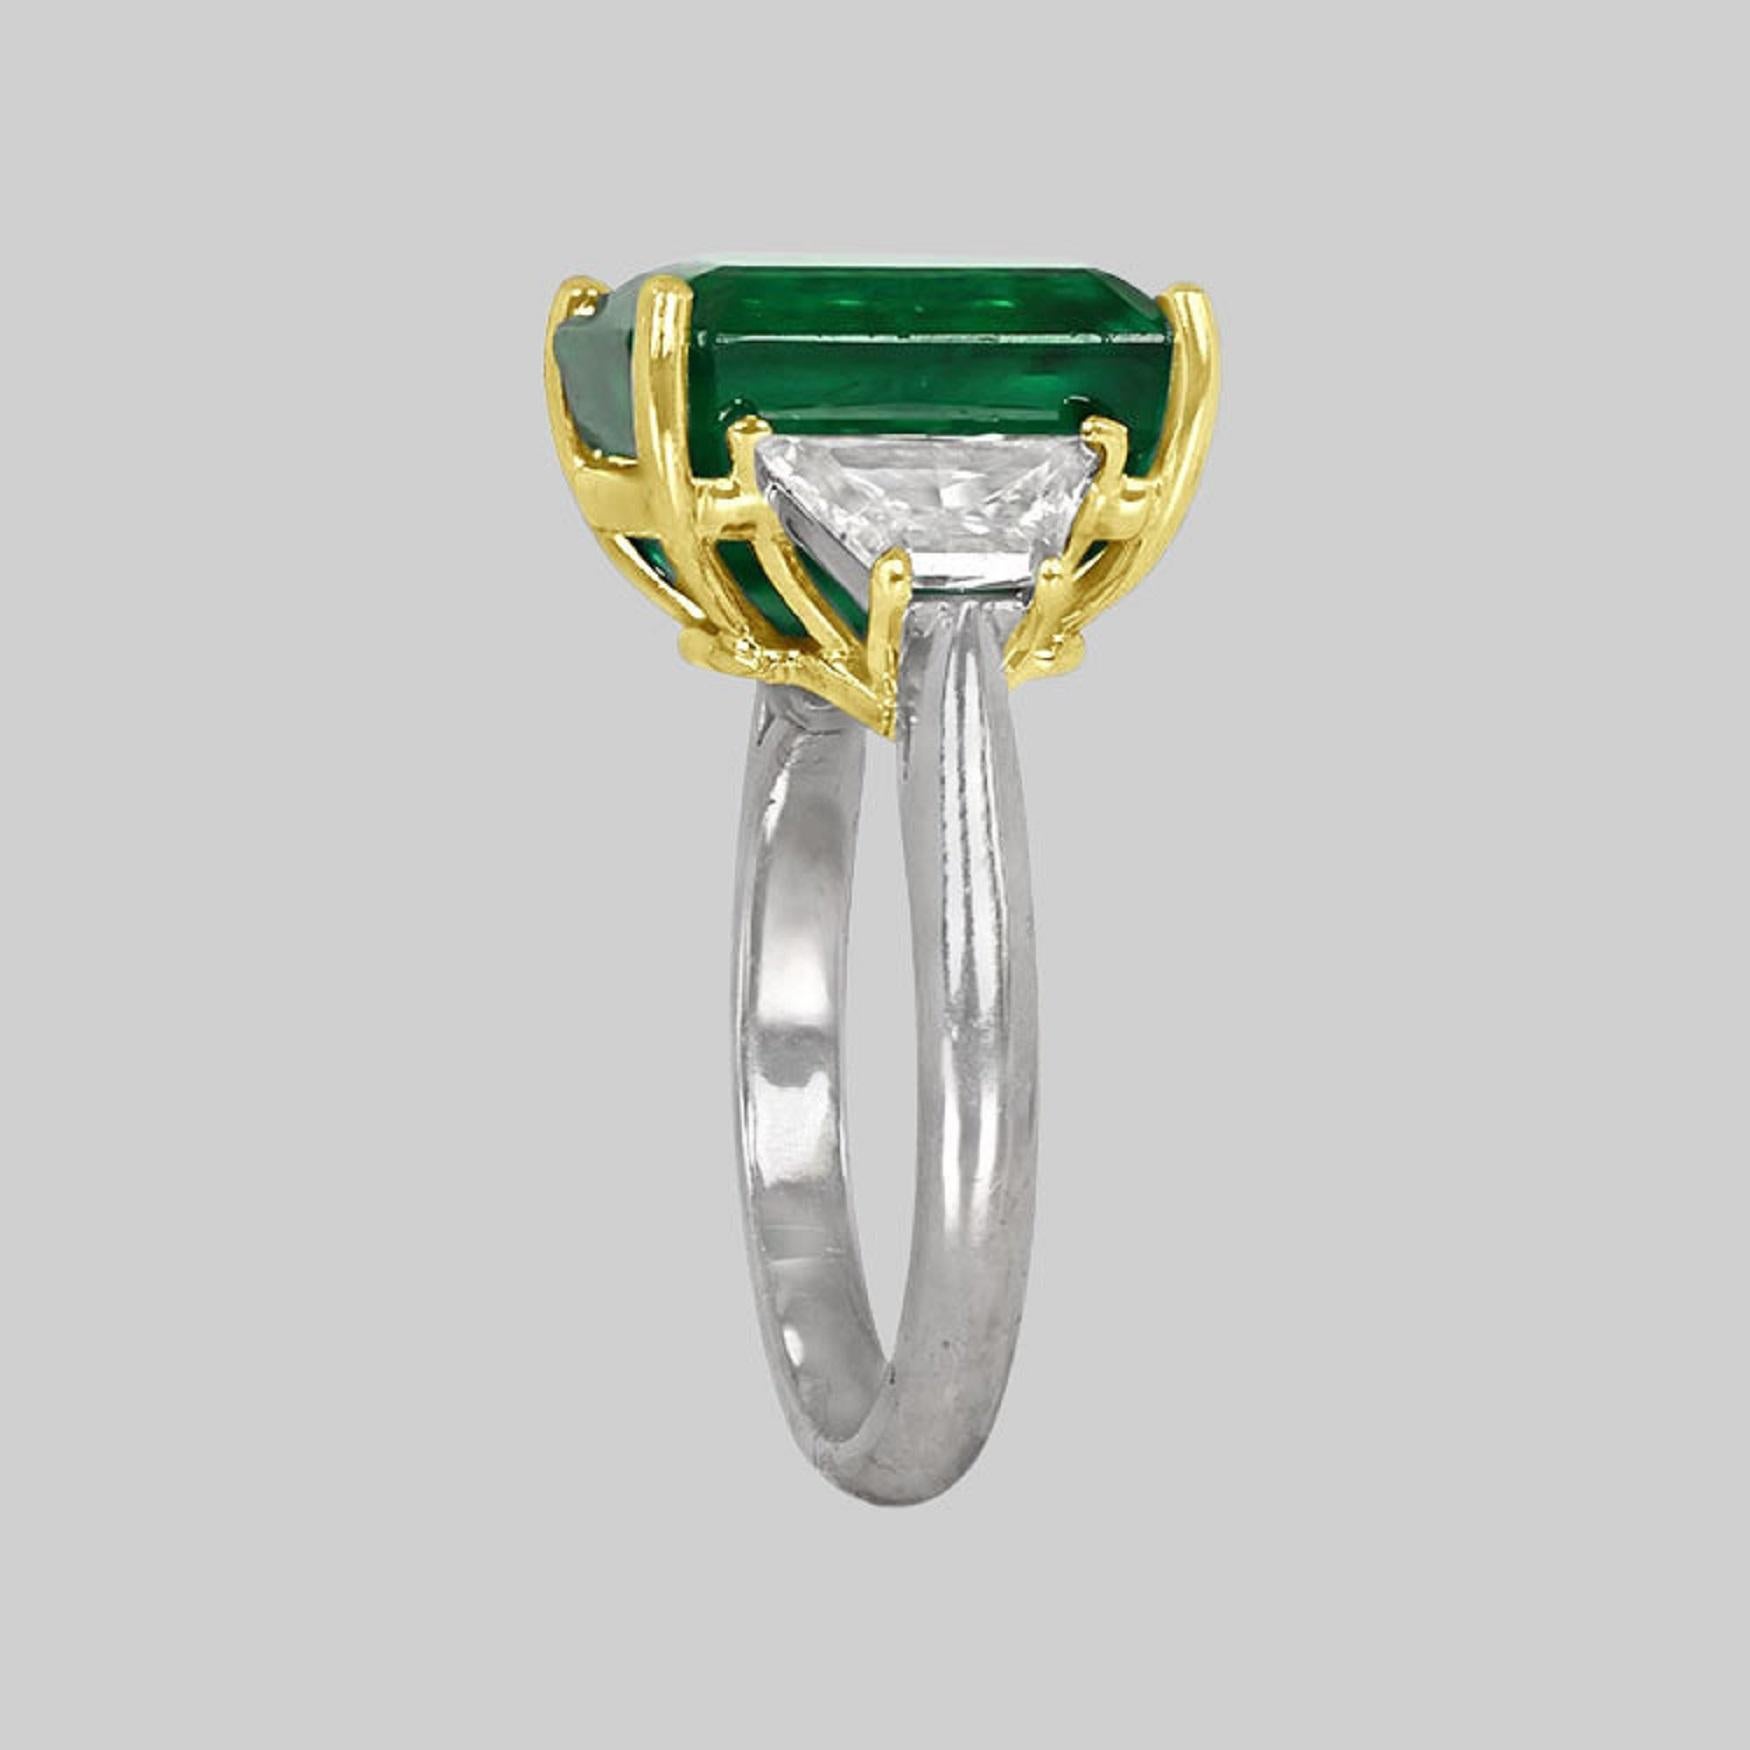 An exquisite minor oil emerald of important dimensions 7 carat 
